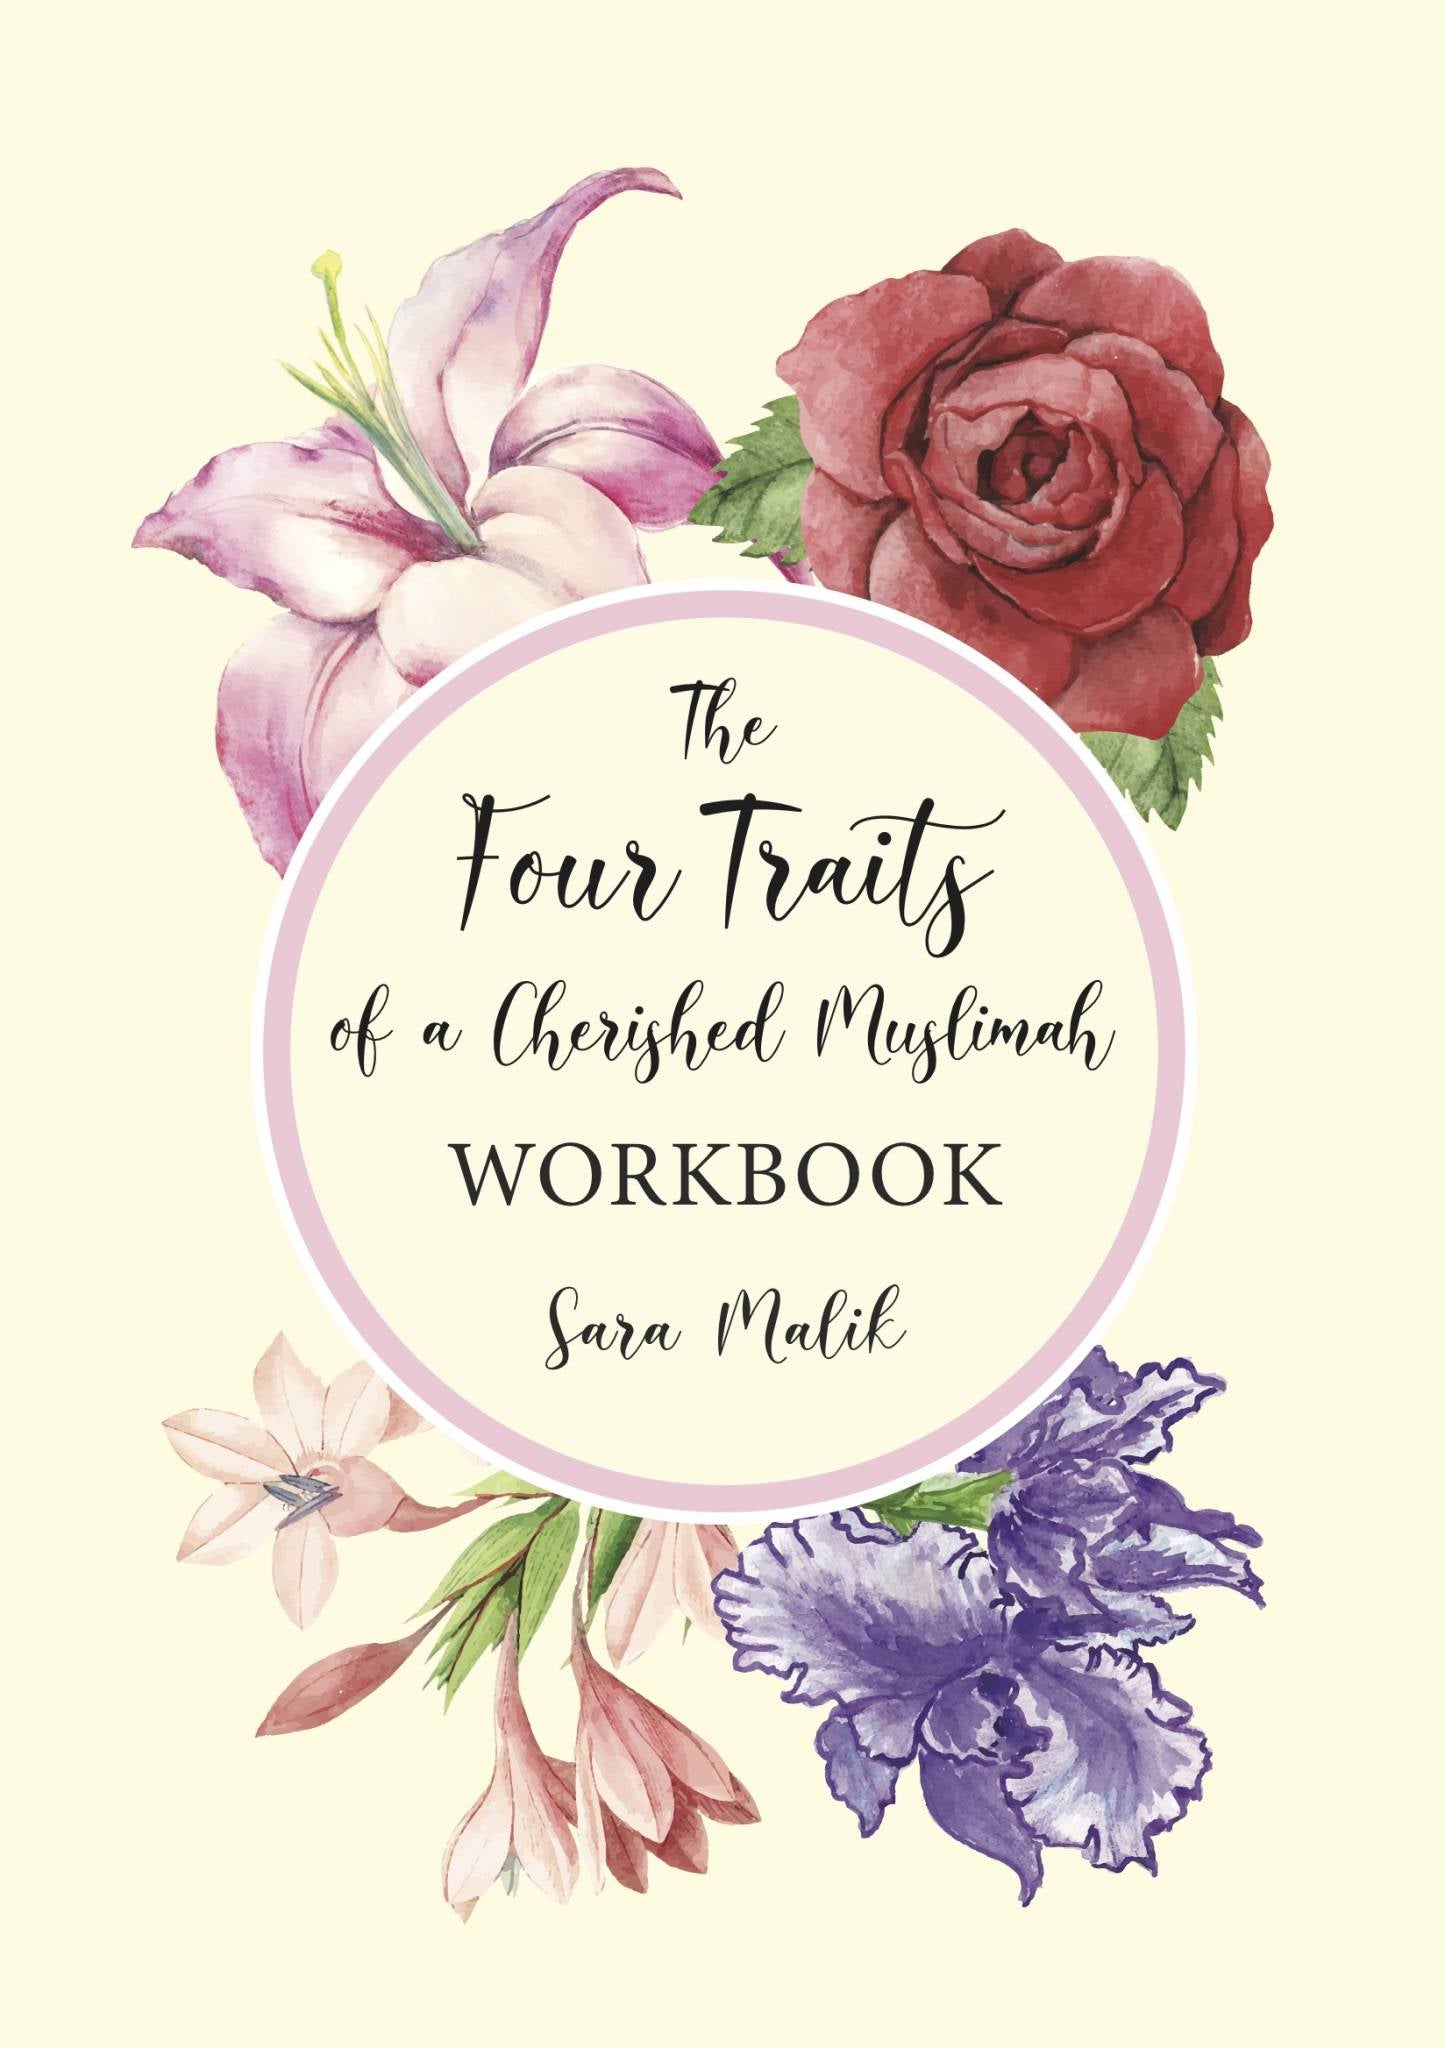 The Four Traits of a Cherished Muslimah: WORKBOOK